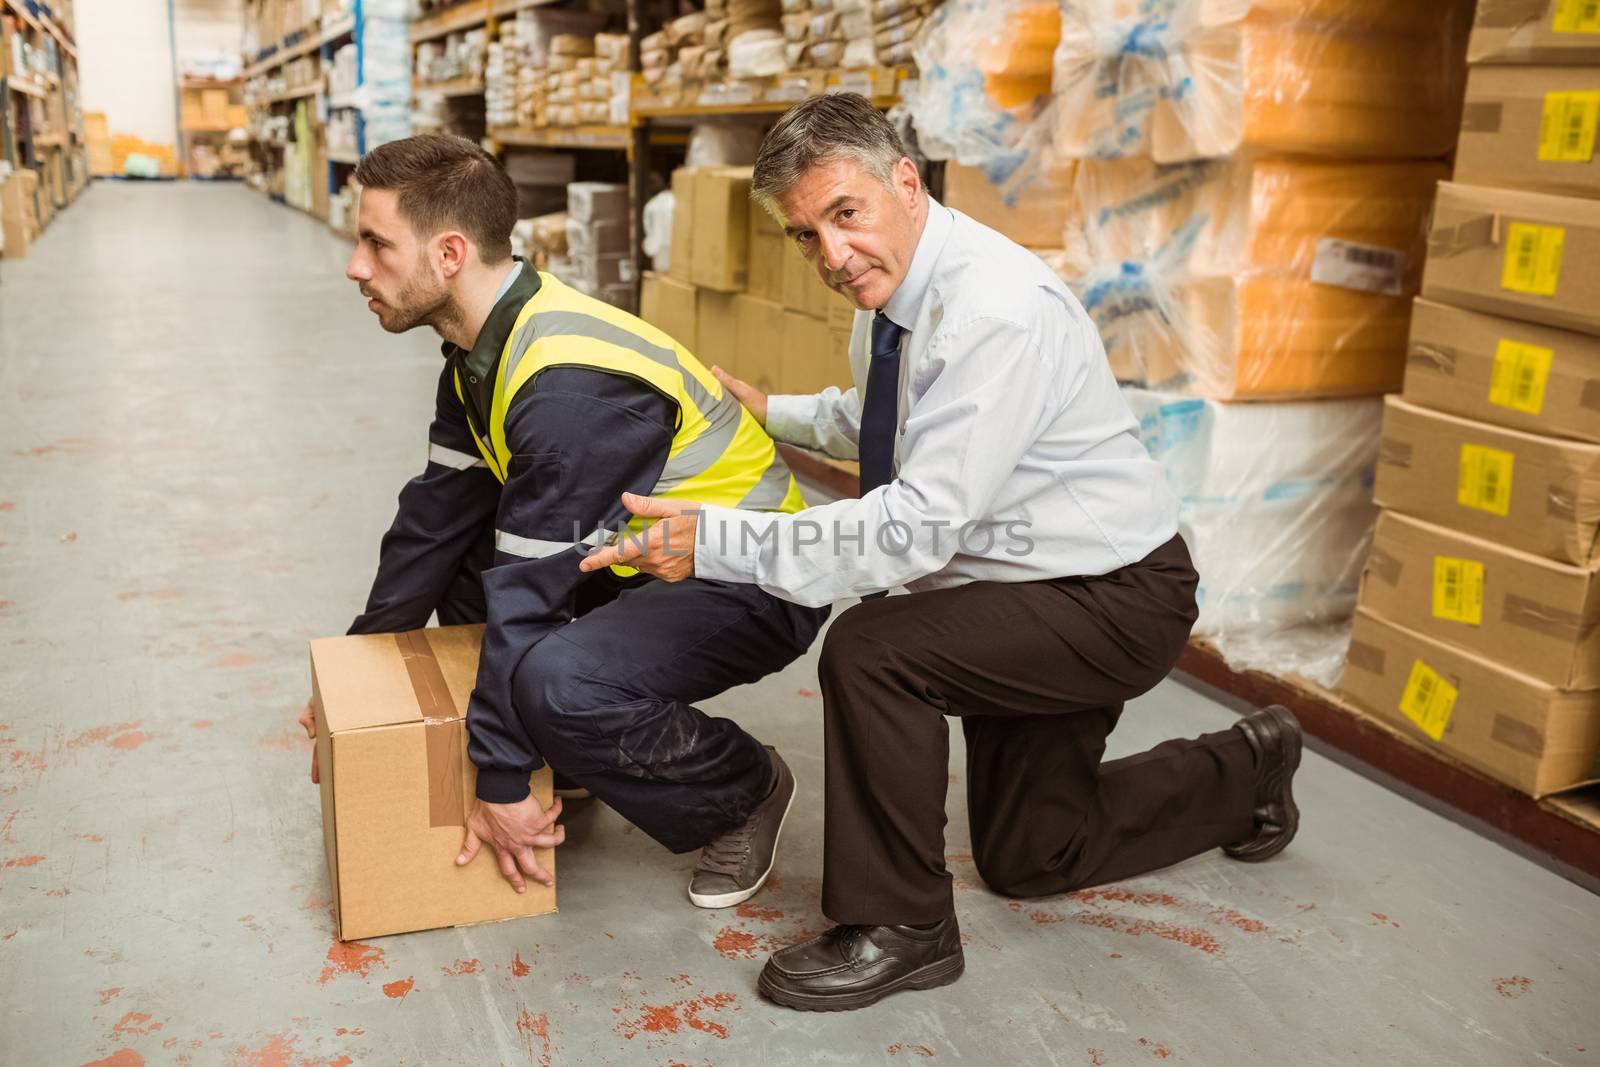 Manager training worker for health and safety measure in a large warehouse